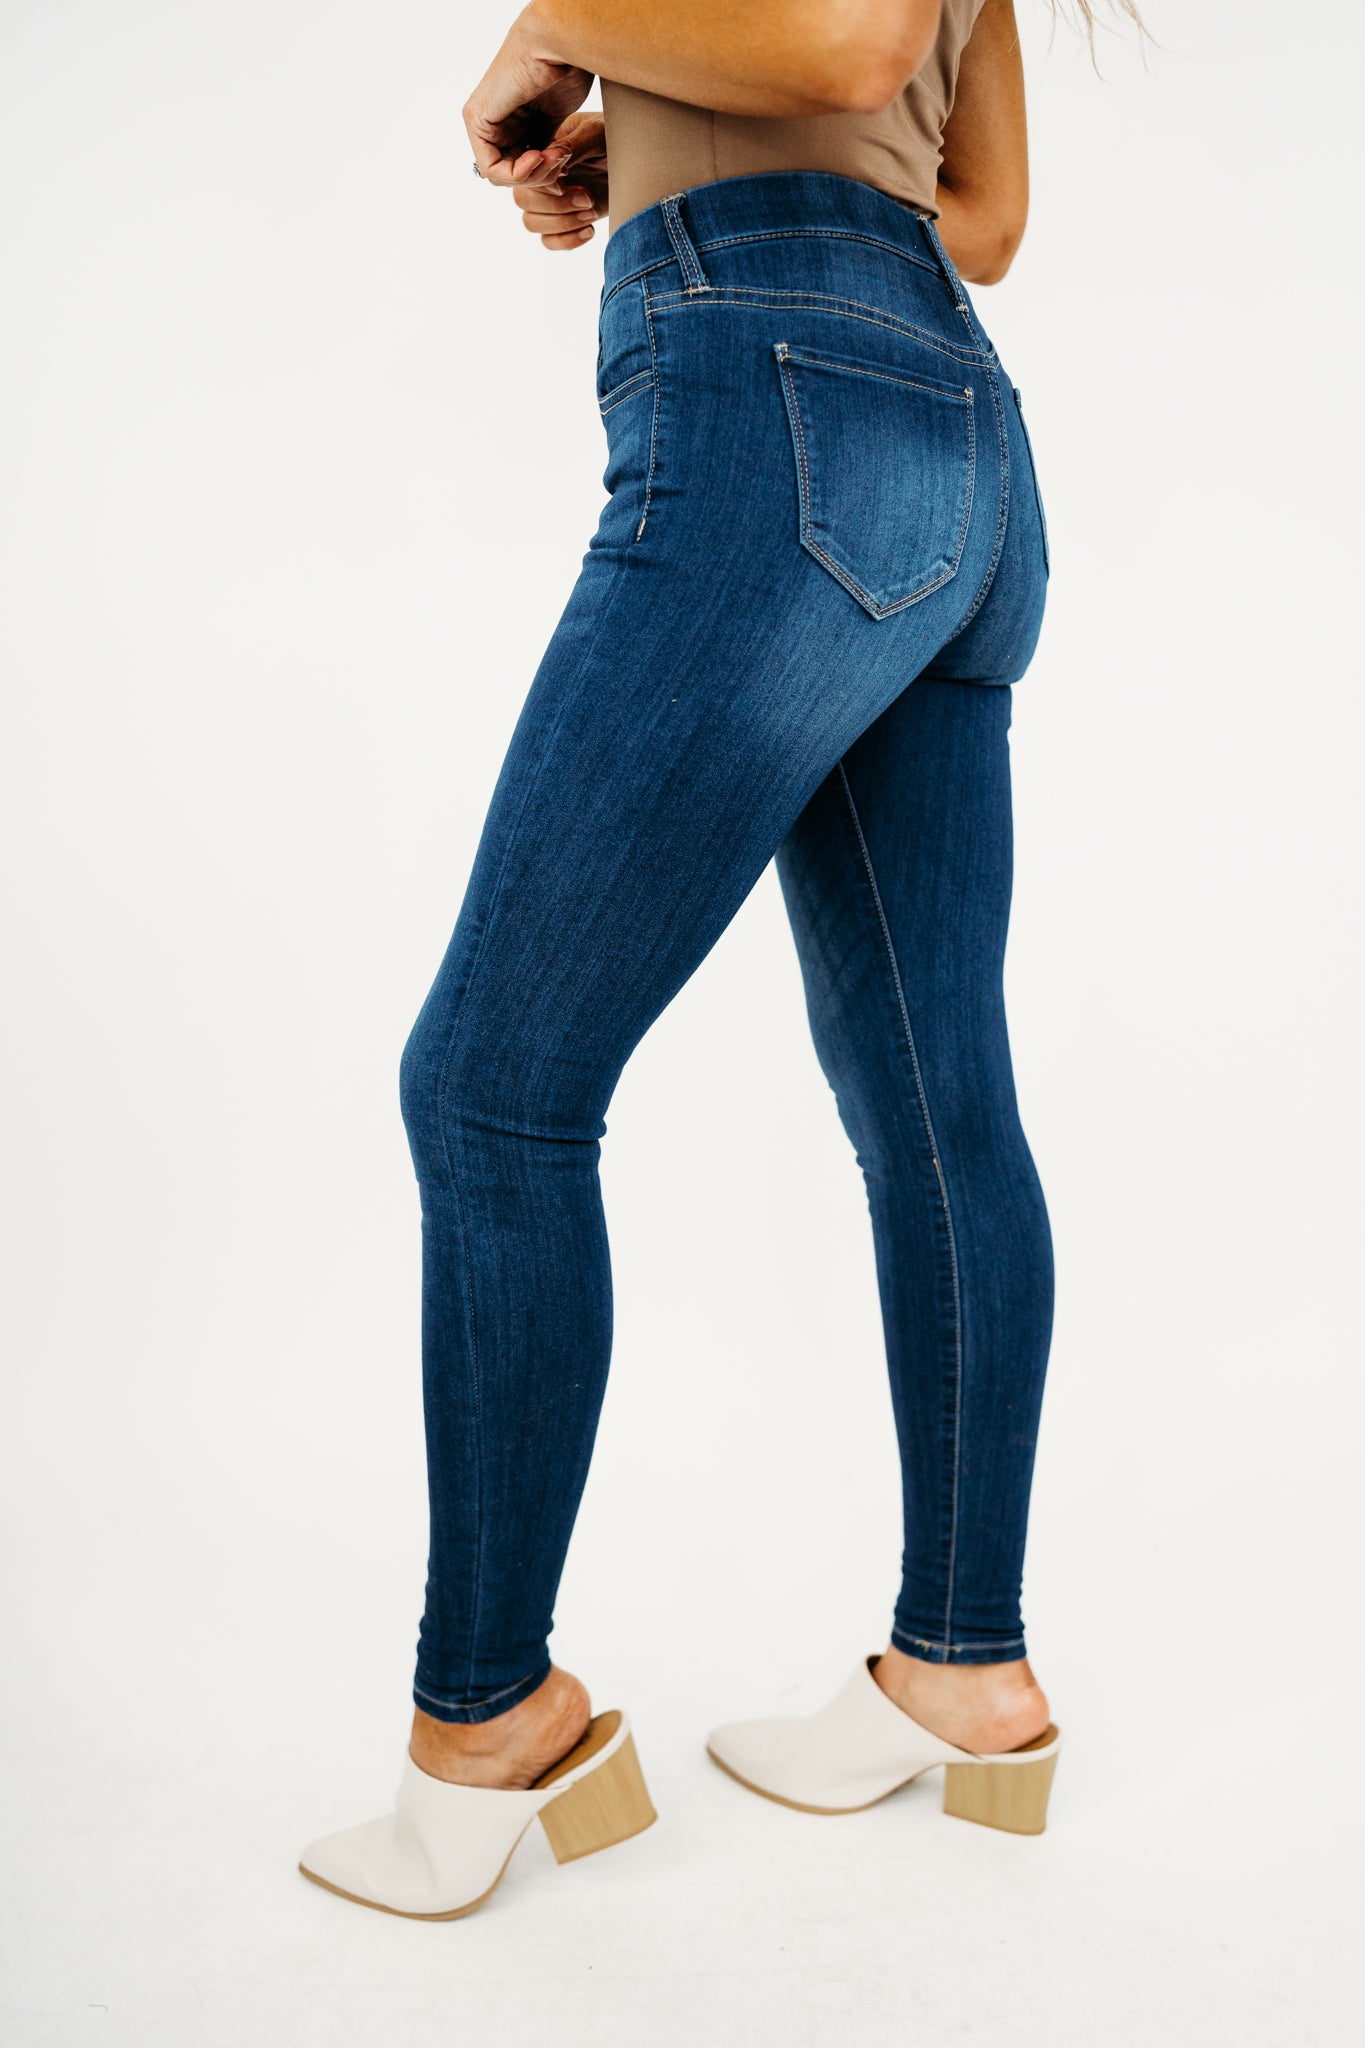 The Sydney Pull On Skinny Jelly Jean